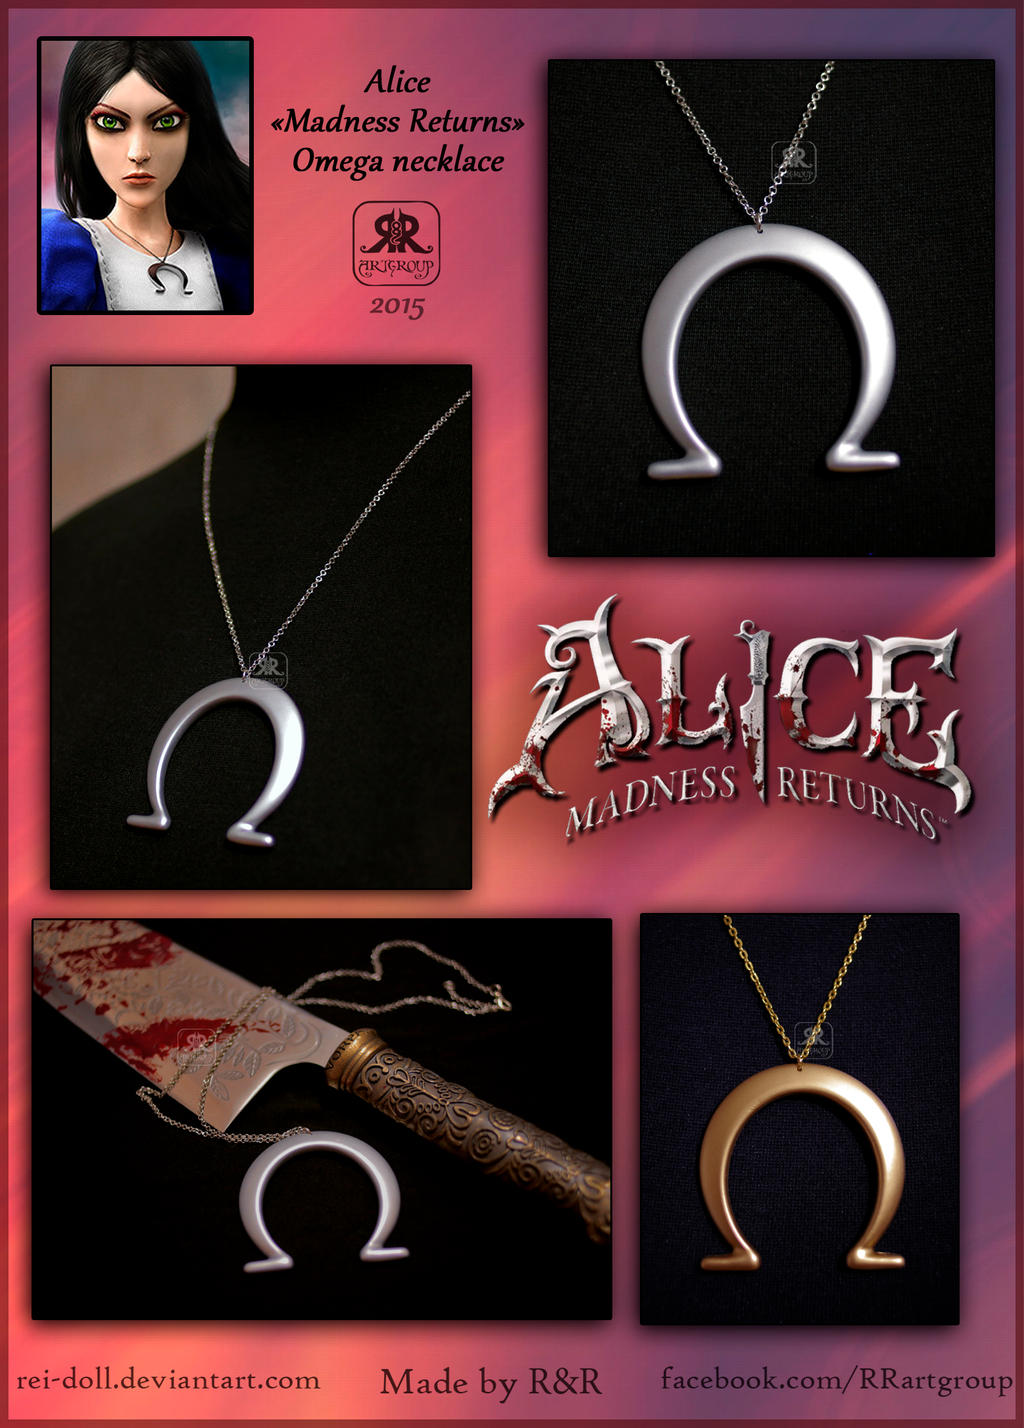 Alice: Madness Returns - Omega Necklace